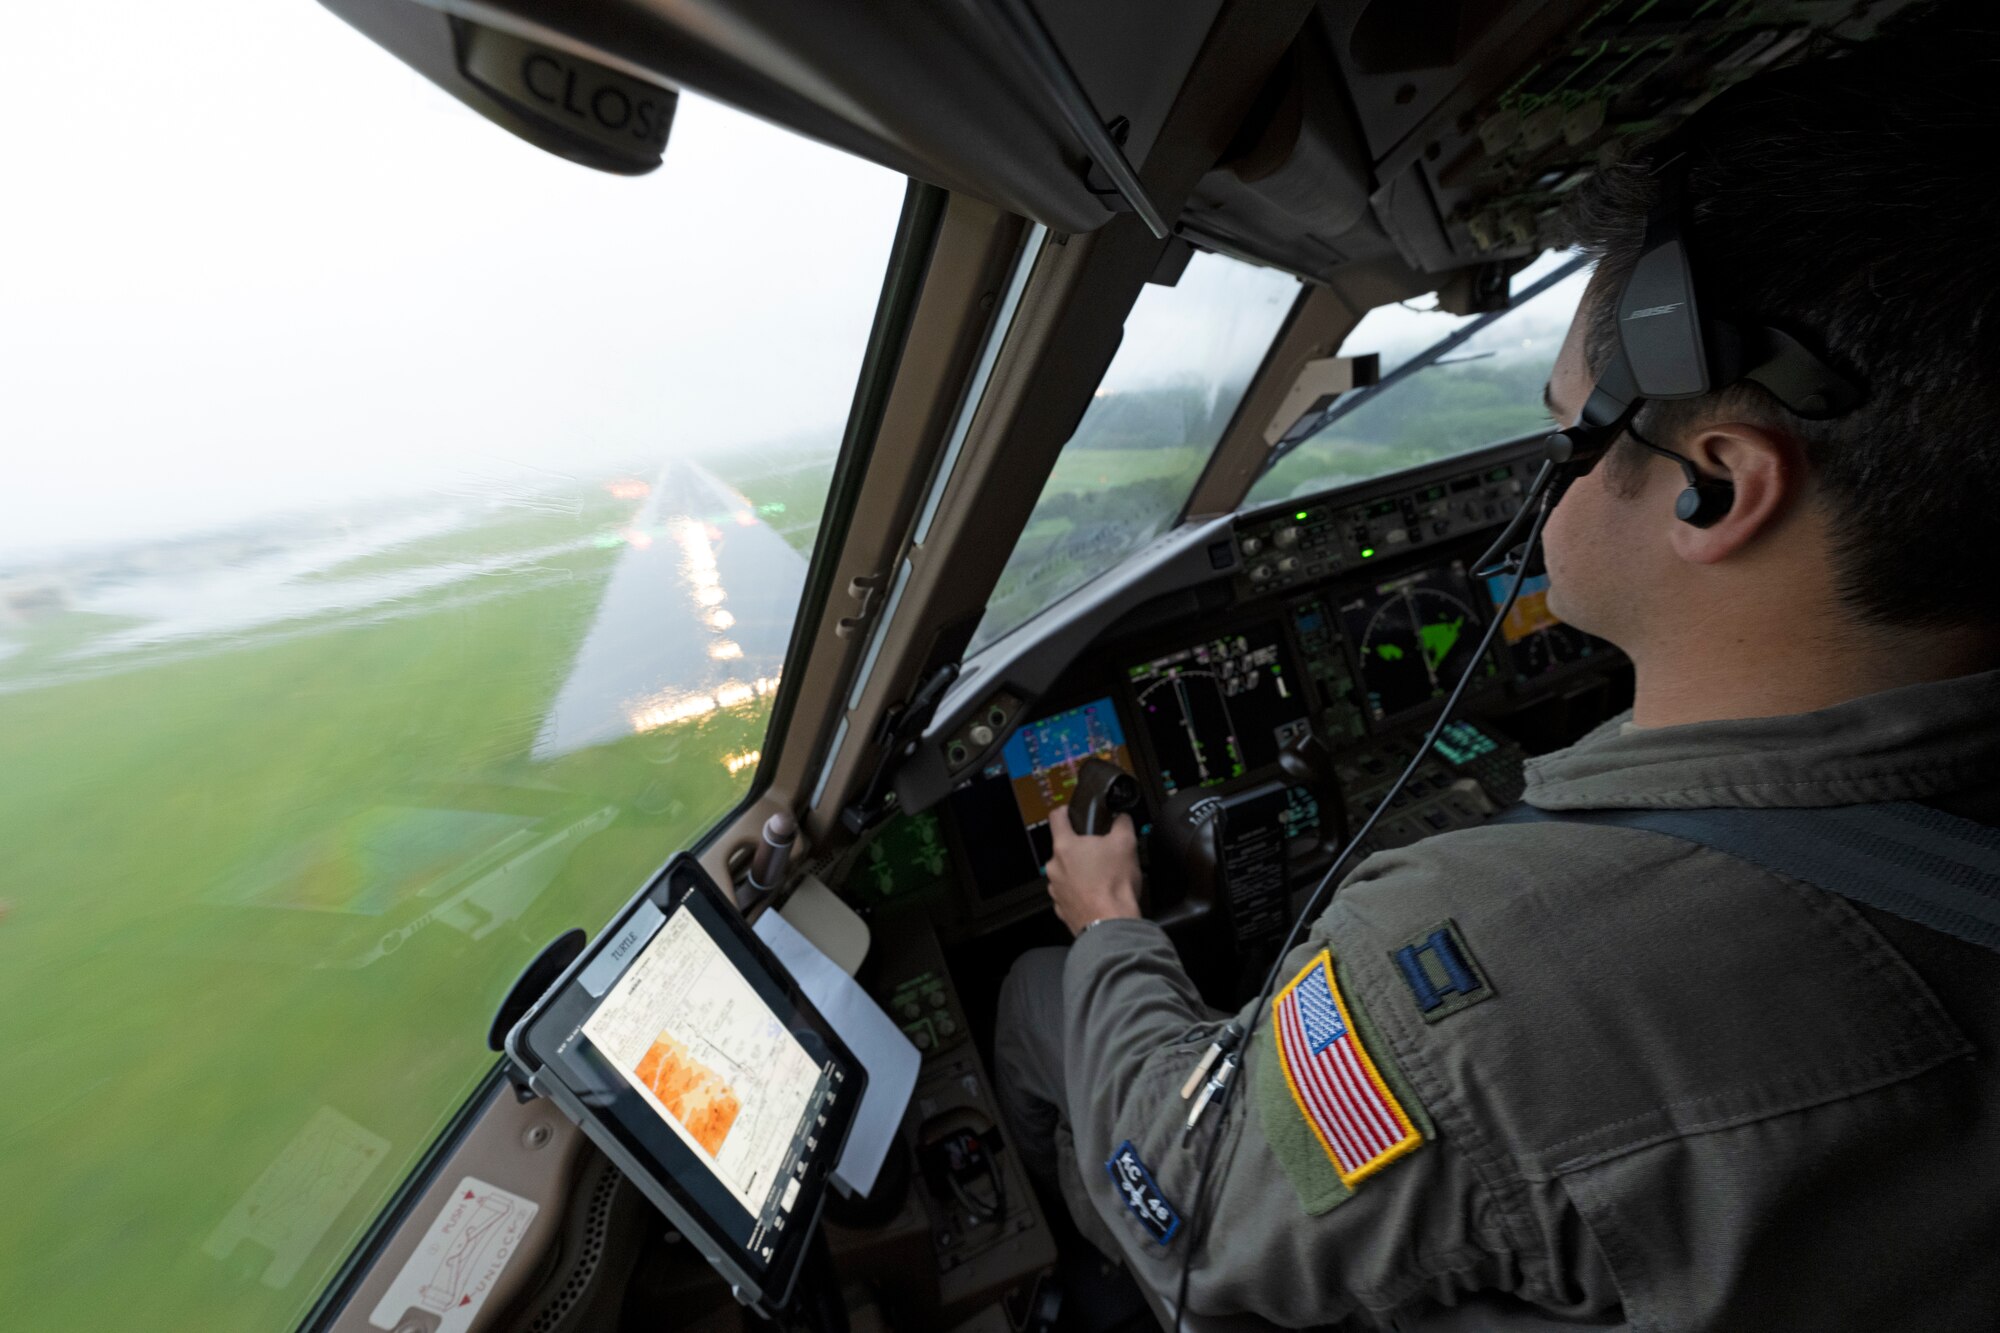 Captain Sebastian Constable, 22nd Operations Group KC-46A Pegasus pilot, approaches the runway of Yokota Air Base, Japan, during inclement weather June 7, 2022, during Air Mobility Command’s Employment Concept Exercise 22-06. The exercise tests aircrew and maintenance personnel in setting up operations abroad and ensuring air refueling mission capabilities in a deployed total force and joint environment. (U.S. Air Force photo by Master Sgt. John Gordinier)